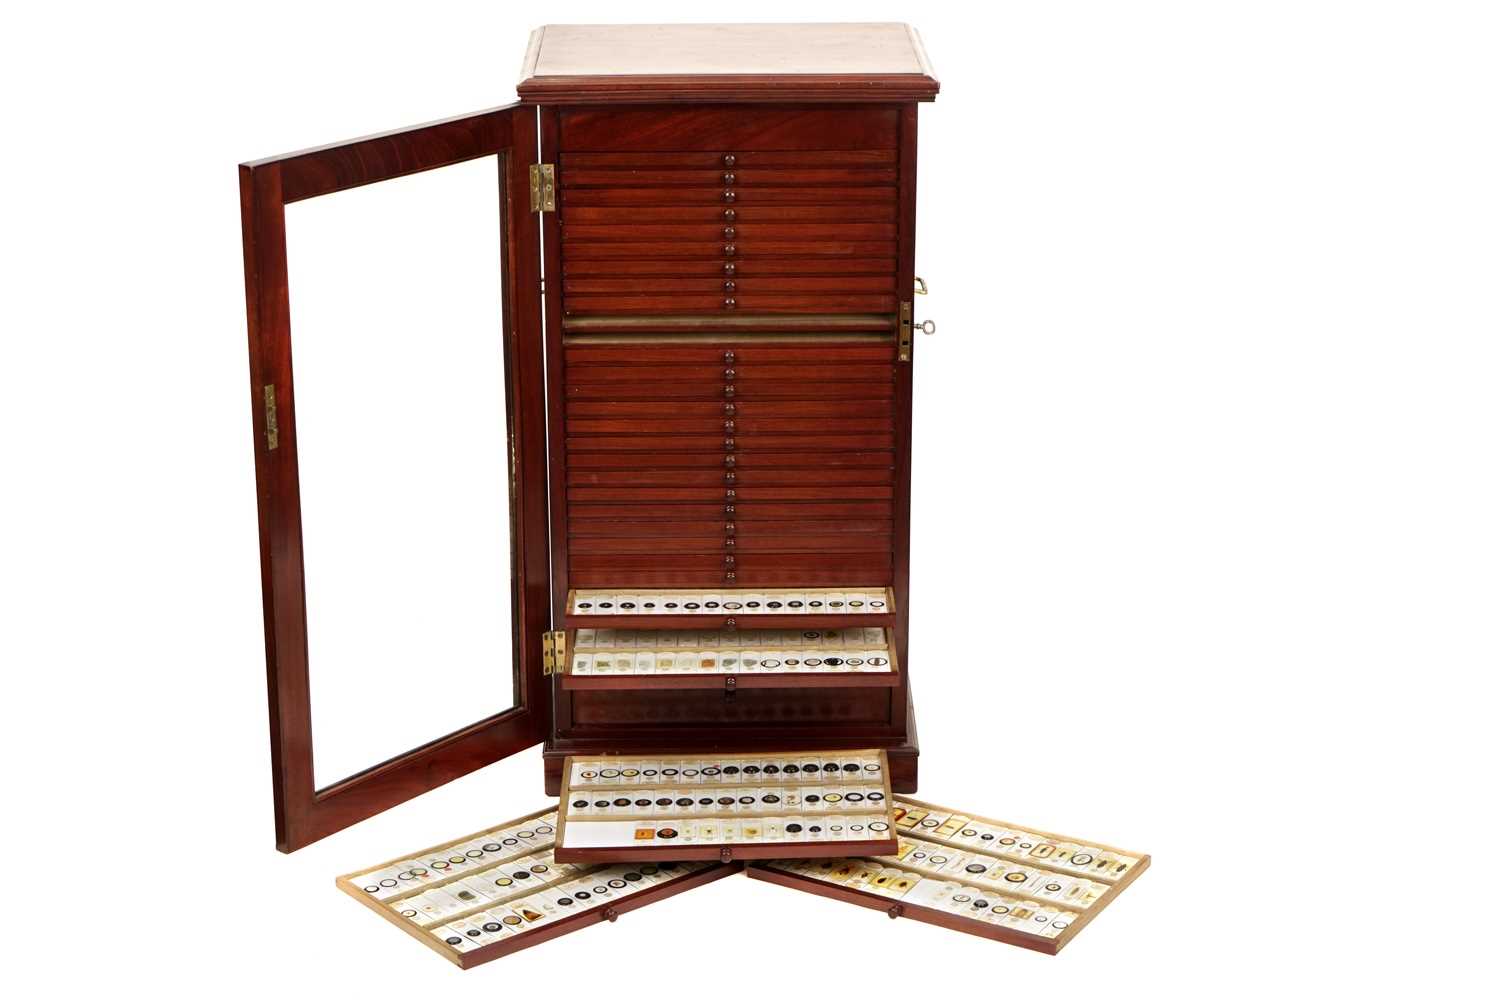 Lot 1 - An Exceptionally Large Cabinet of Microscope Slides